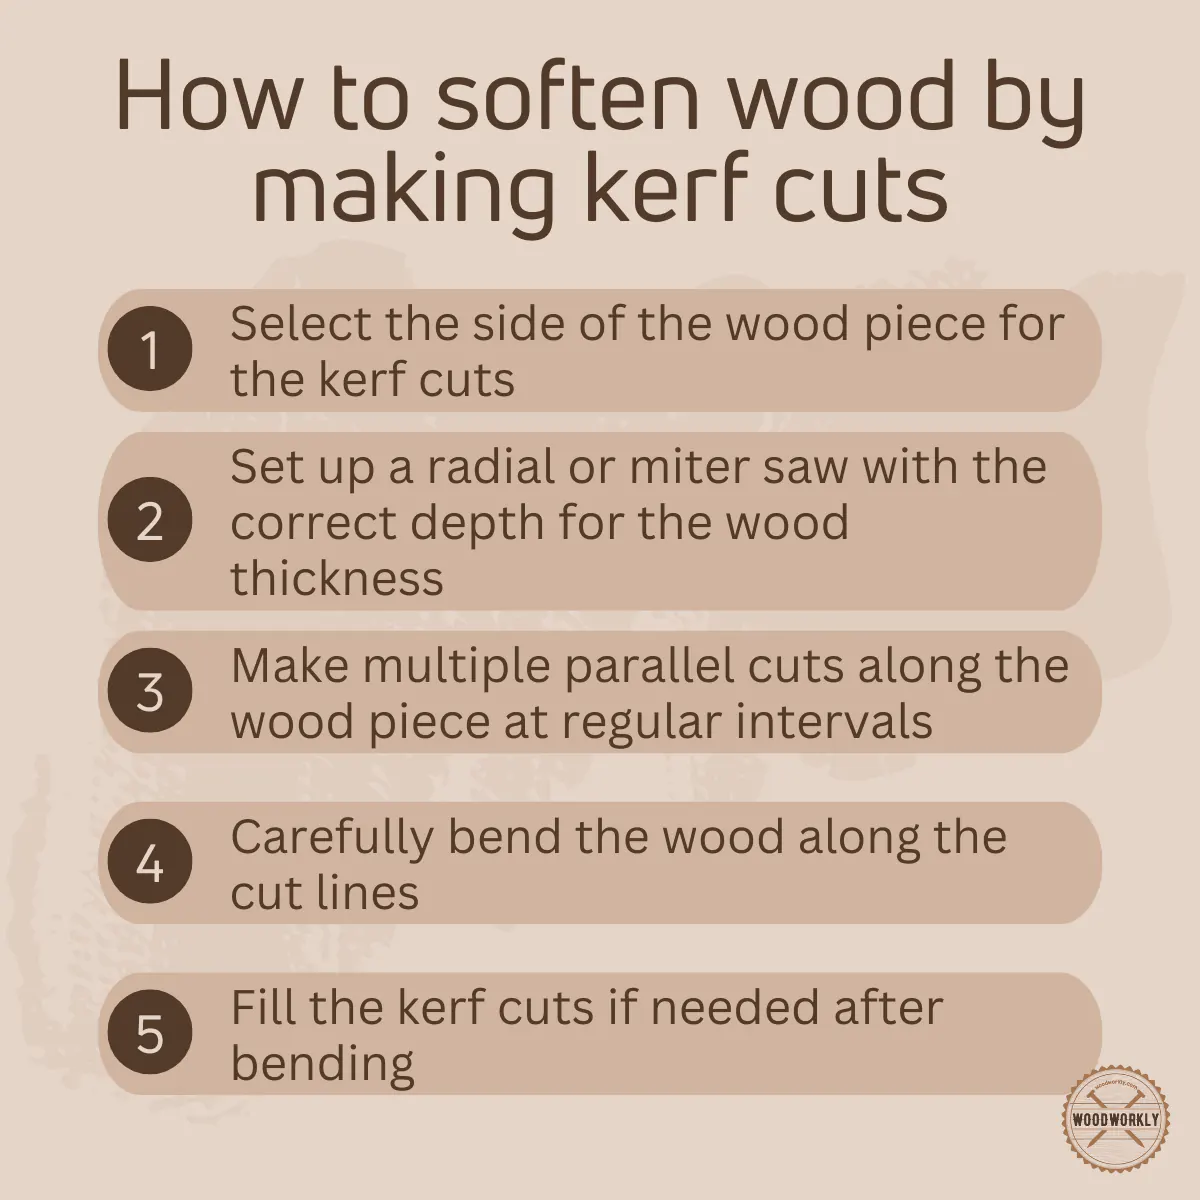 How to soften wood by making kerf cuts